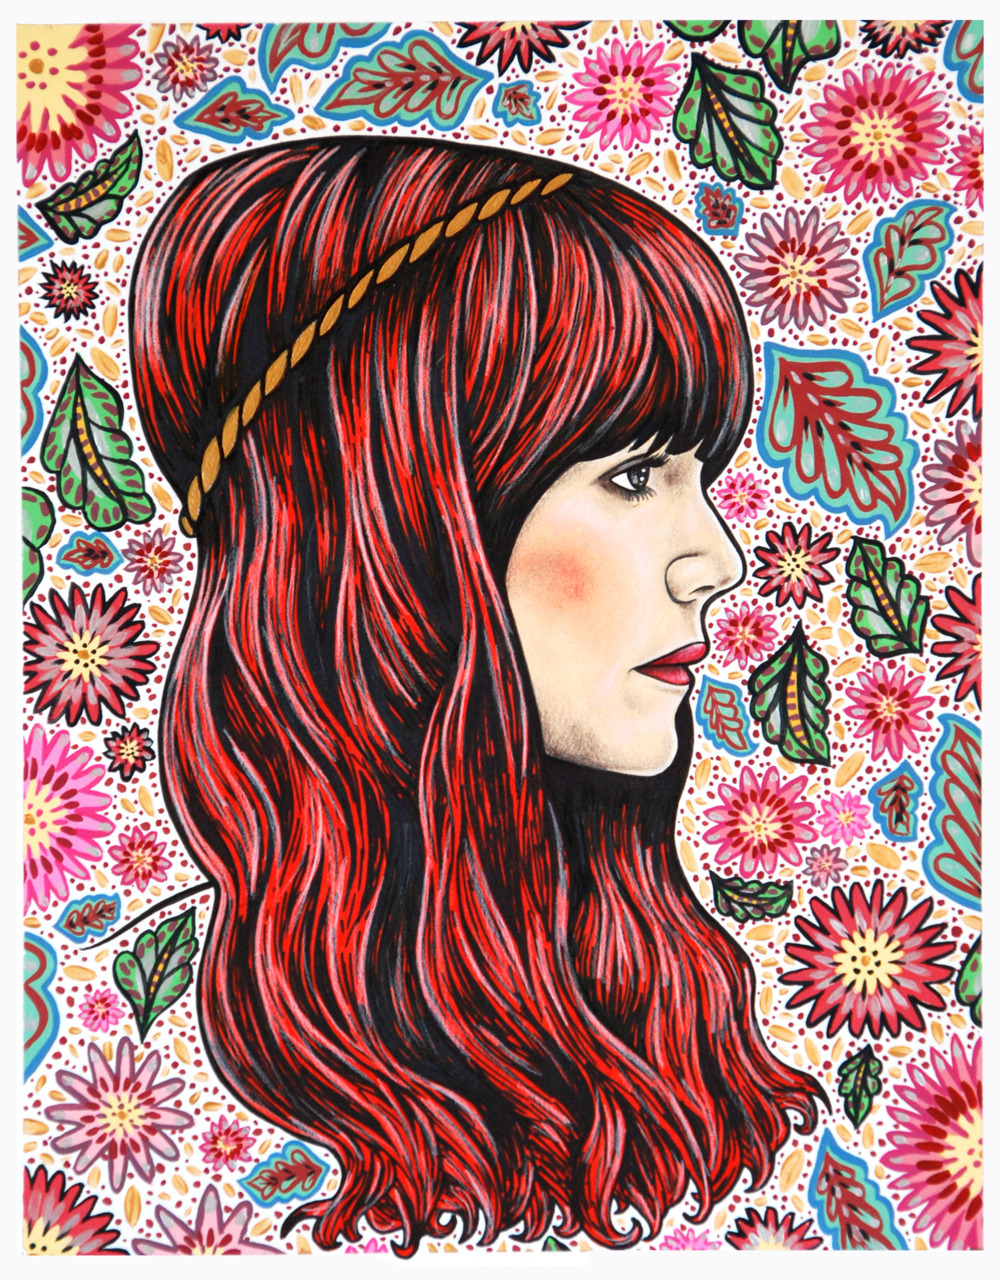 “Jenny” January 2011 14″ x 17″ Strathmore Bristol (Smooth) Colored Pencil, Pastel, Sharpie and Gouache By Jade Sheldon